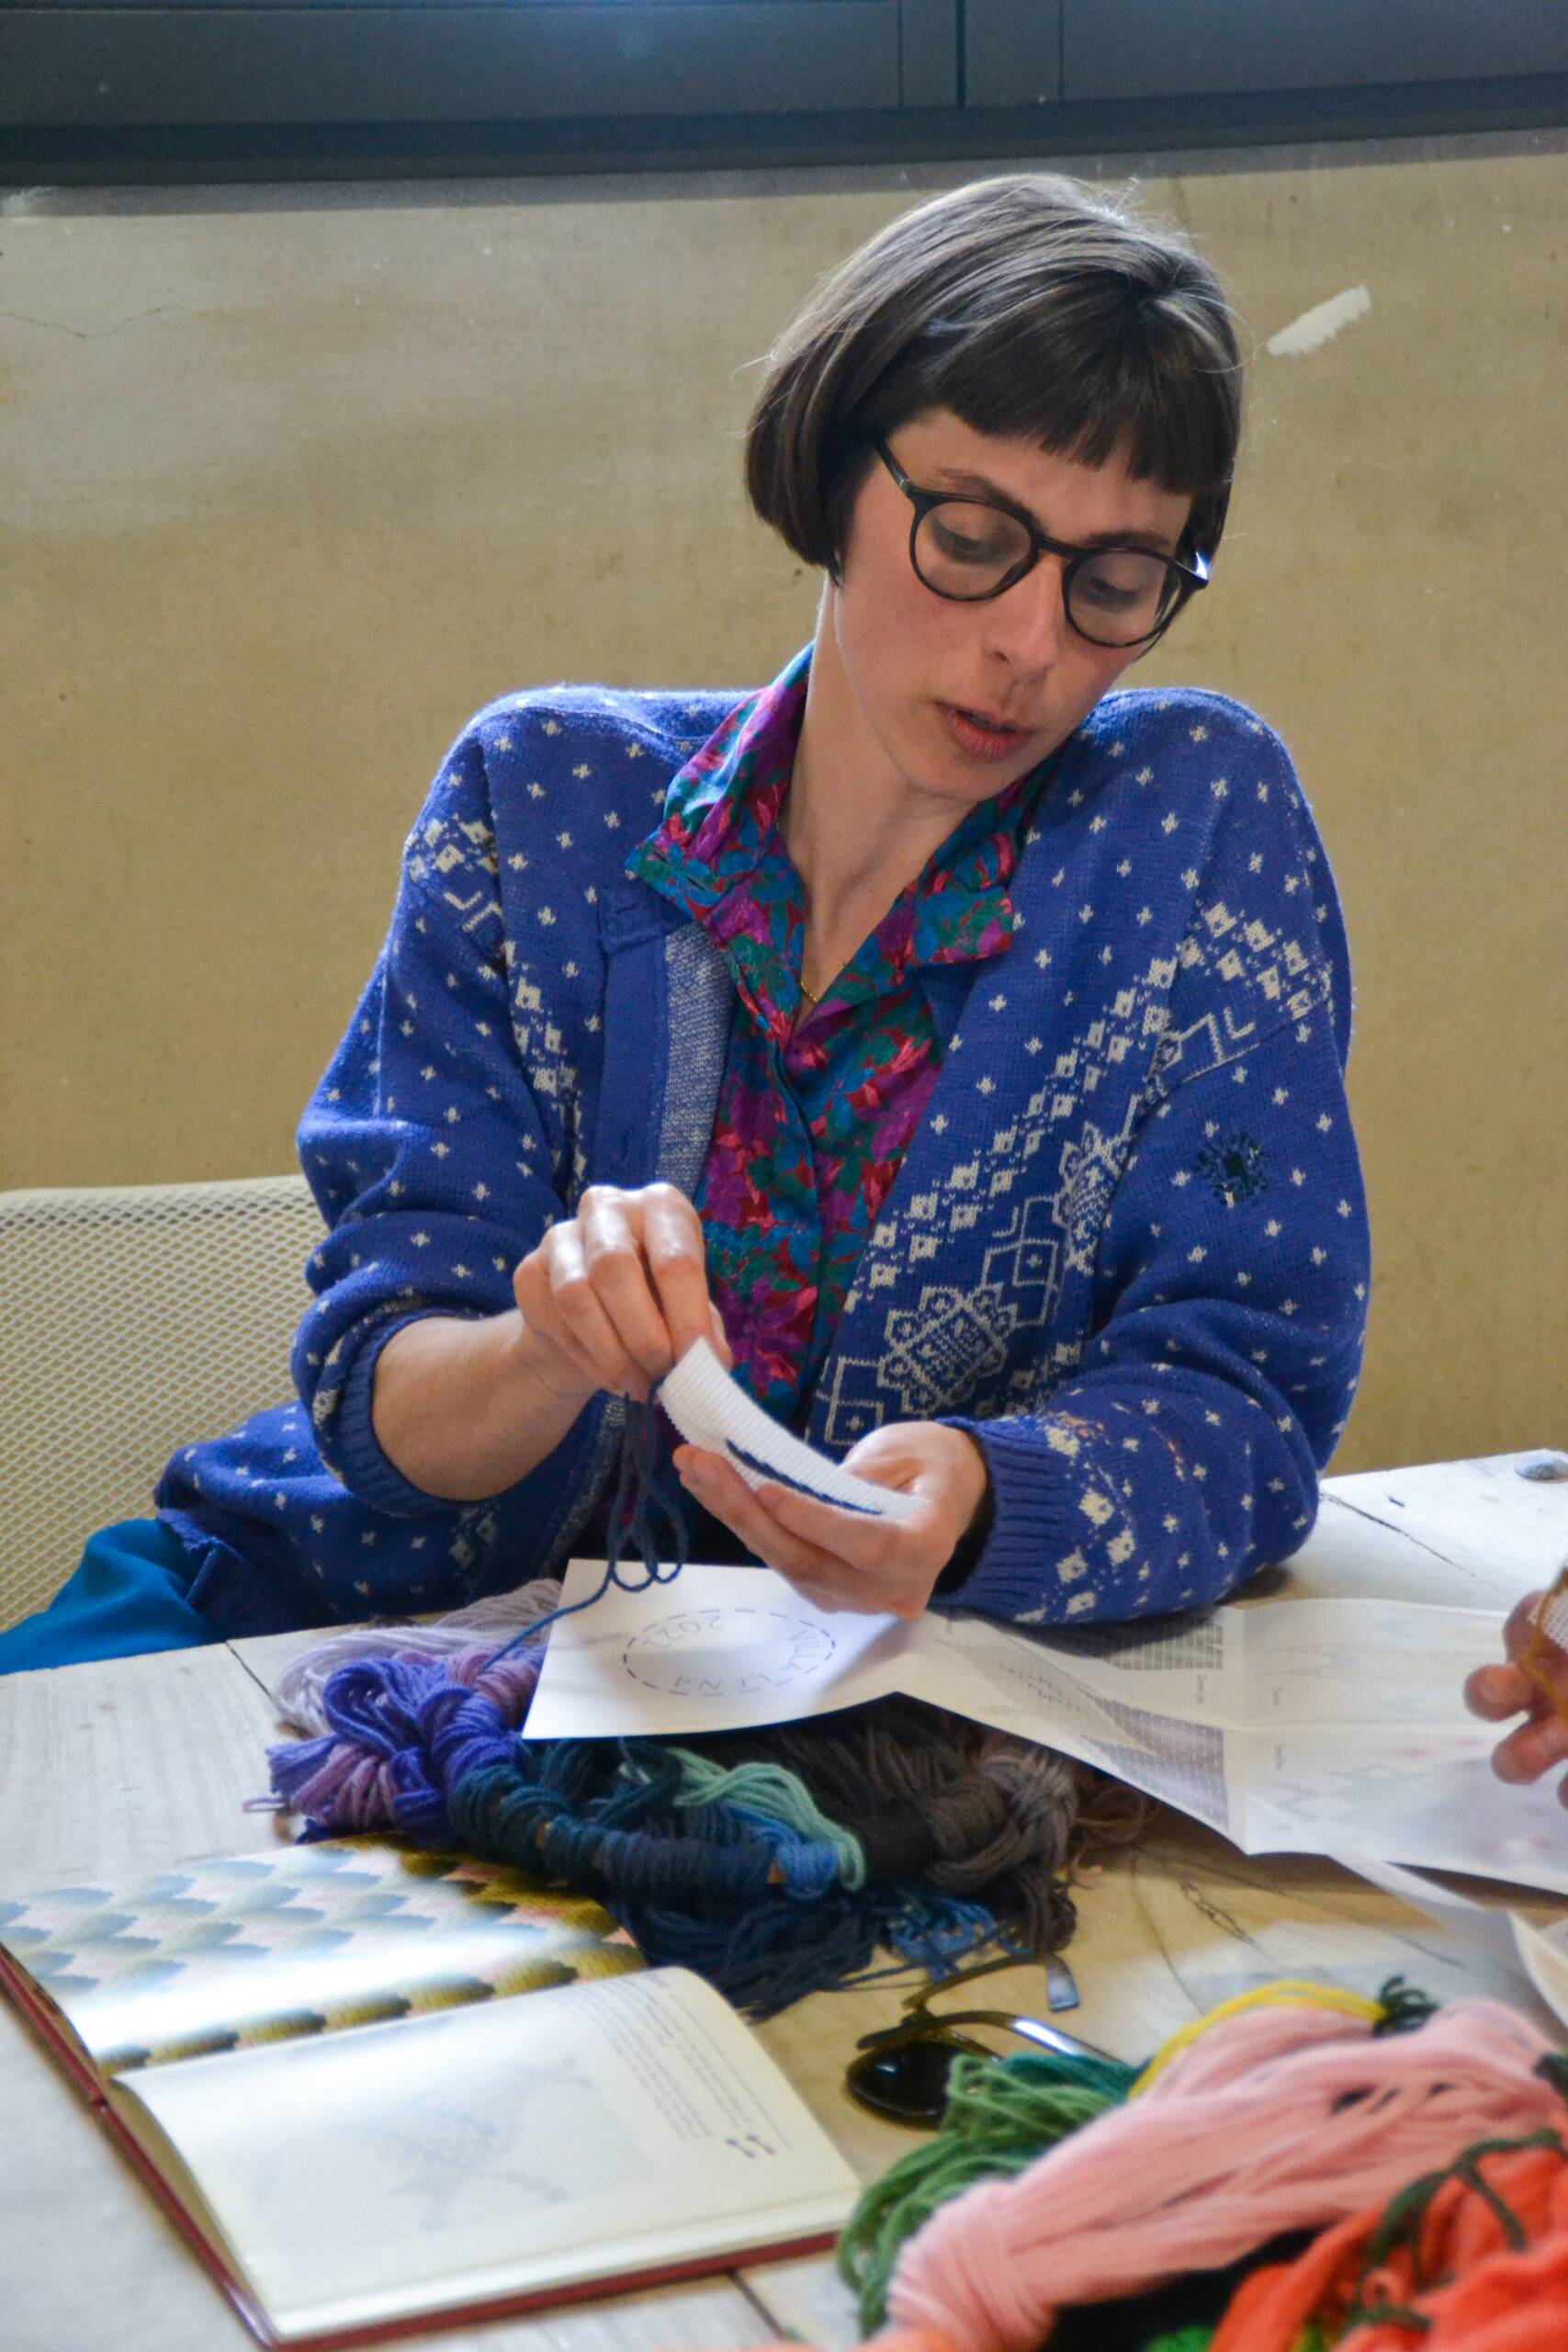 Villa Lena workshops, Series of 12 embroidery workshops held at Villa Lena as part of the Villa Lena Artist Residency, Tuscany Italy, 2022